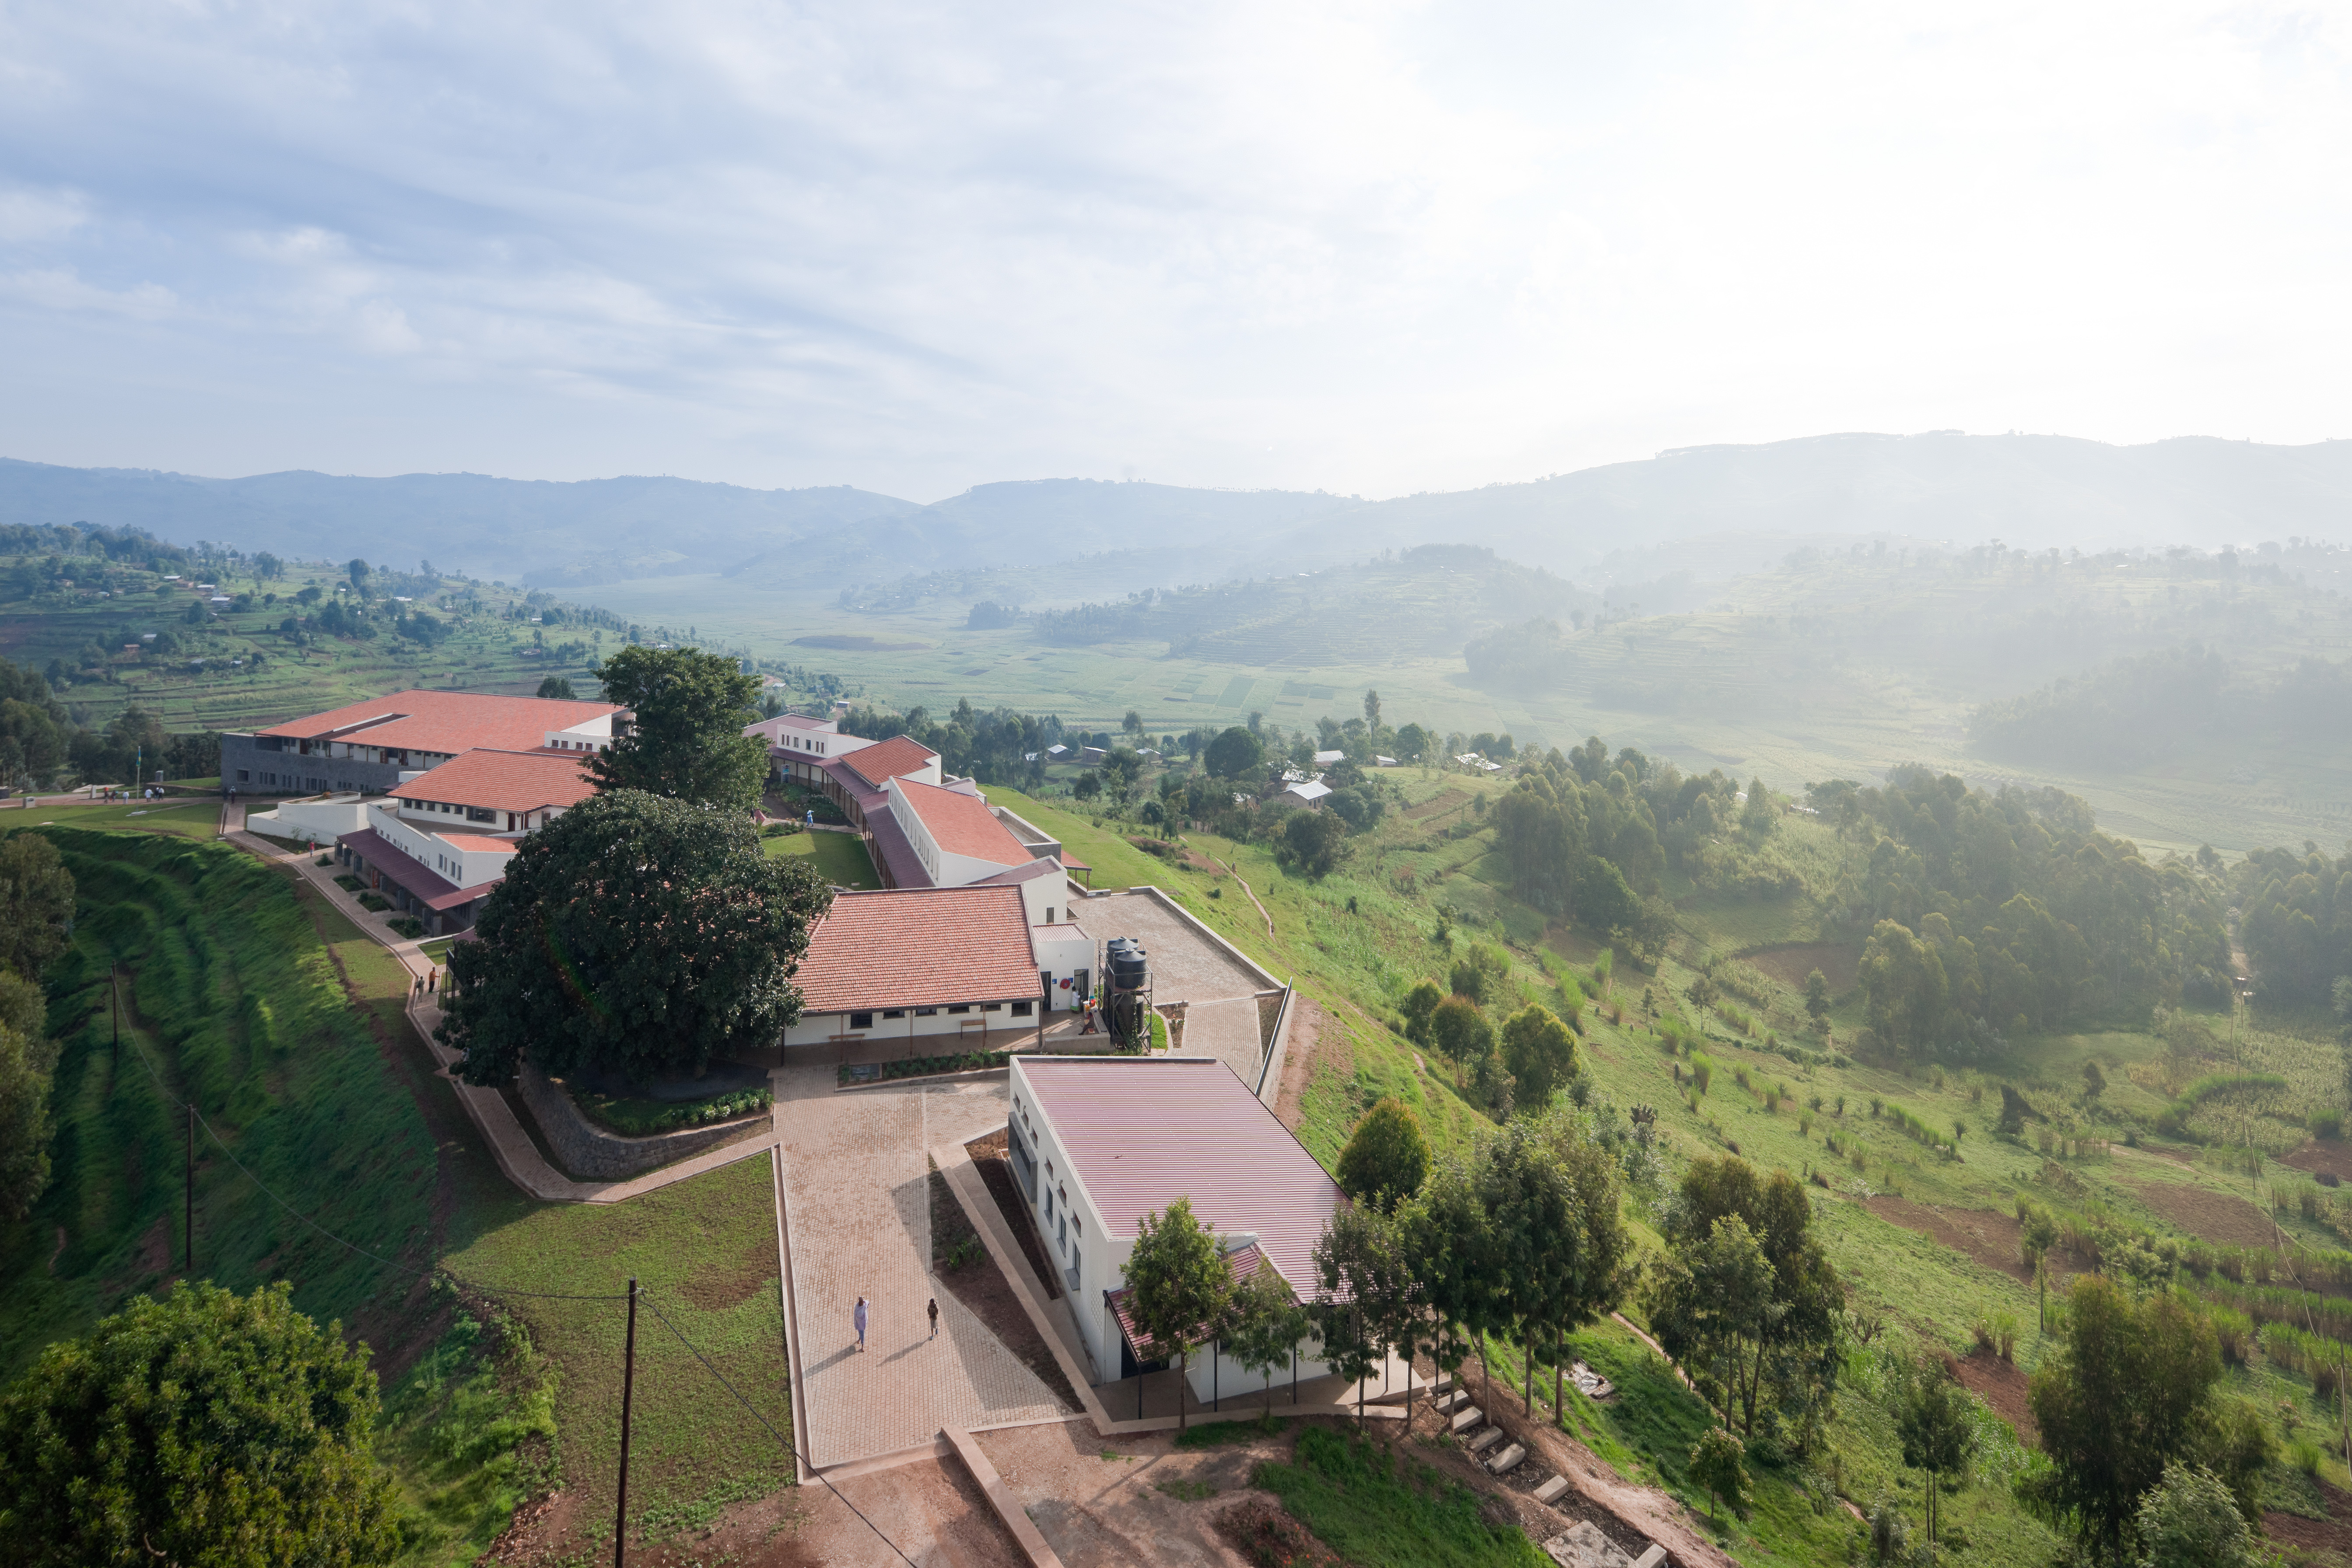 The Butaro Hospital in Rwanda’s Burera District has 140 beds and serves 400,000 people.